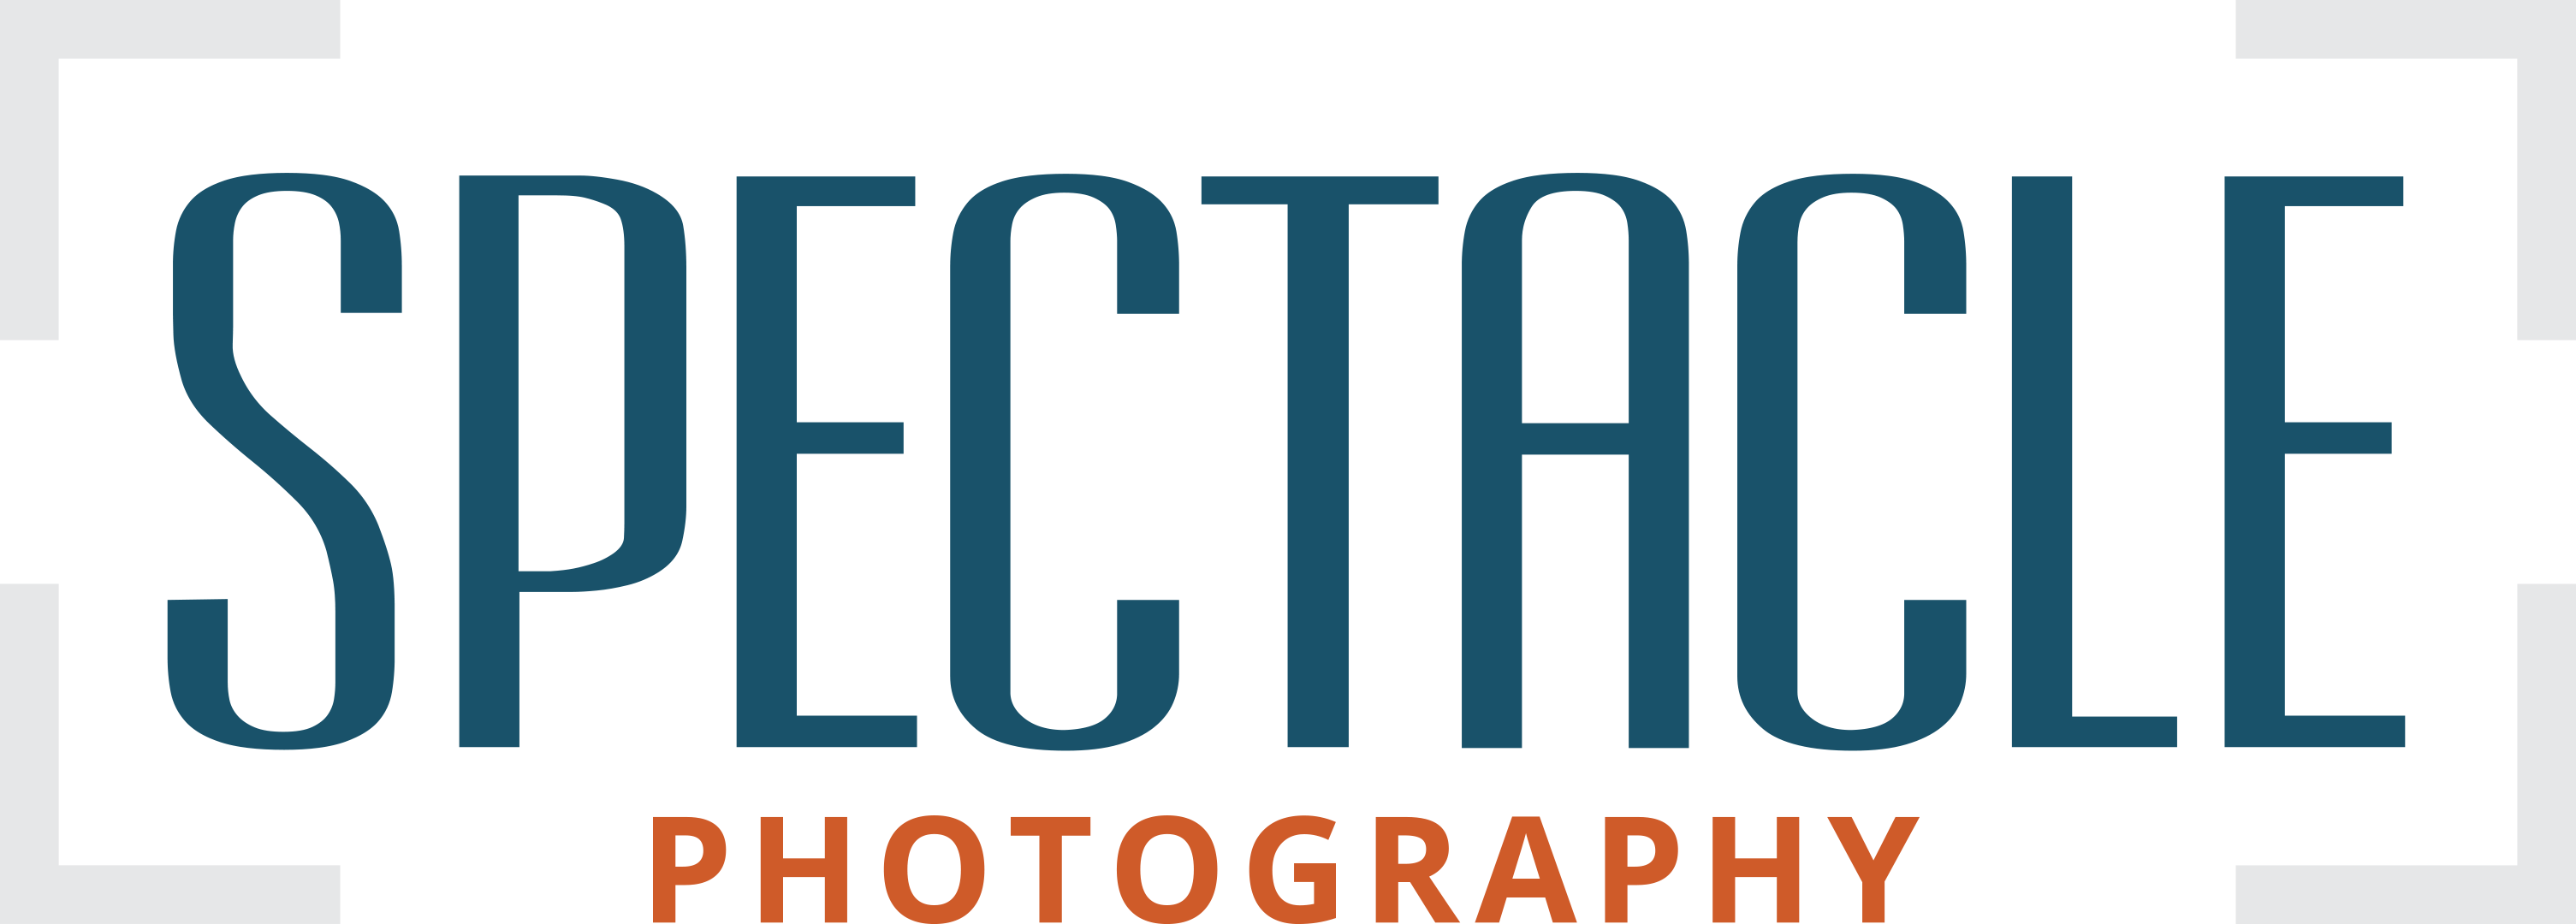 Spectacle Photography